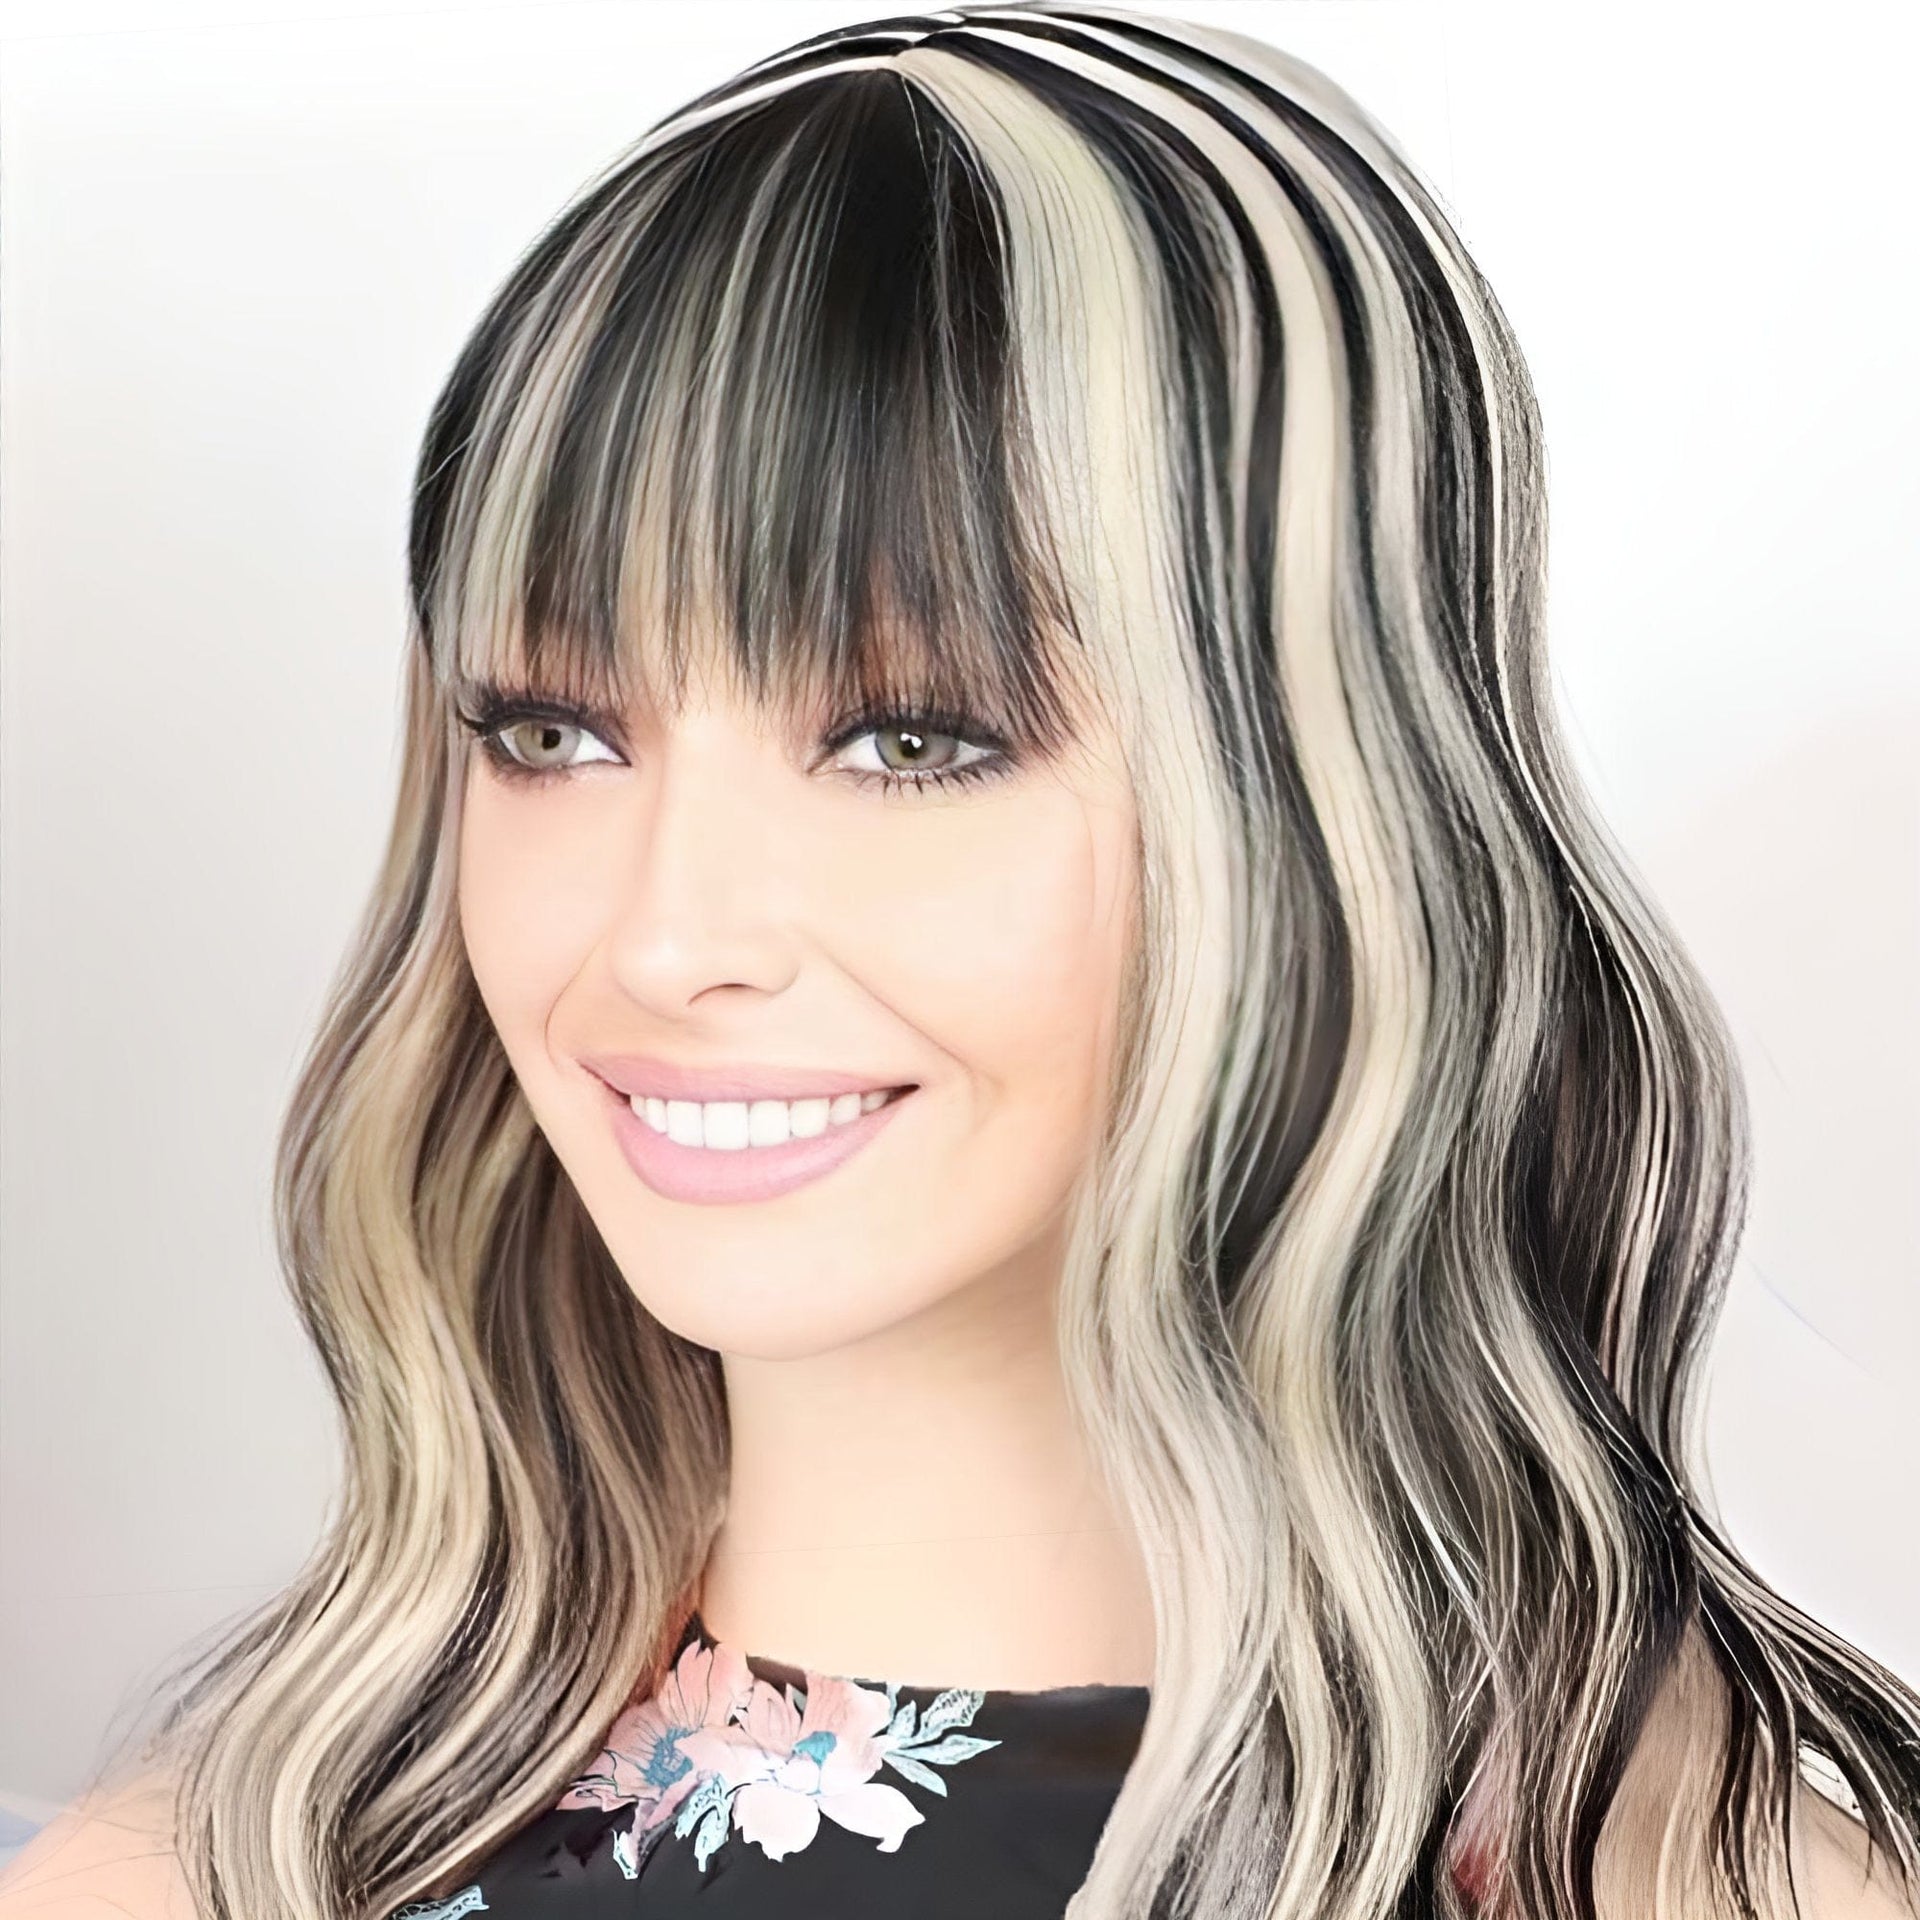 nevermindyrhead Women Salt And Pepper Ombre Hair Toppers 14 Inches Clip In Hairpiece with Bangs Hair Toppers for Thinning Hair